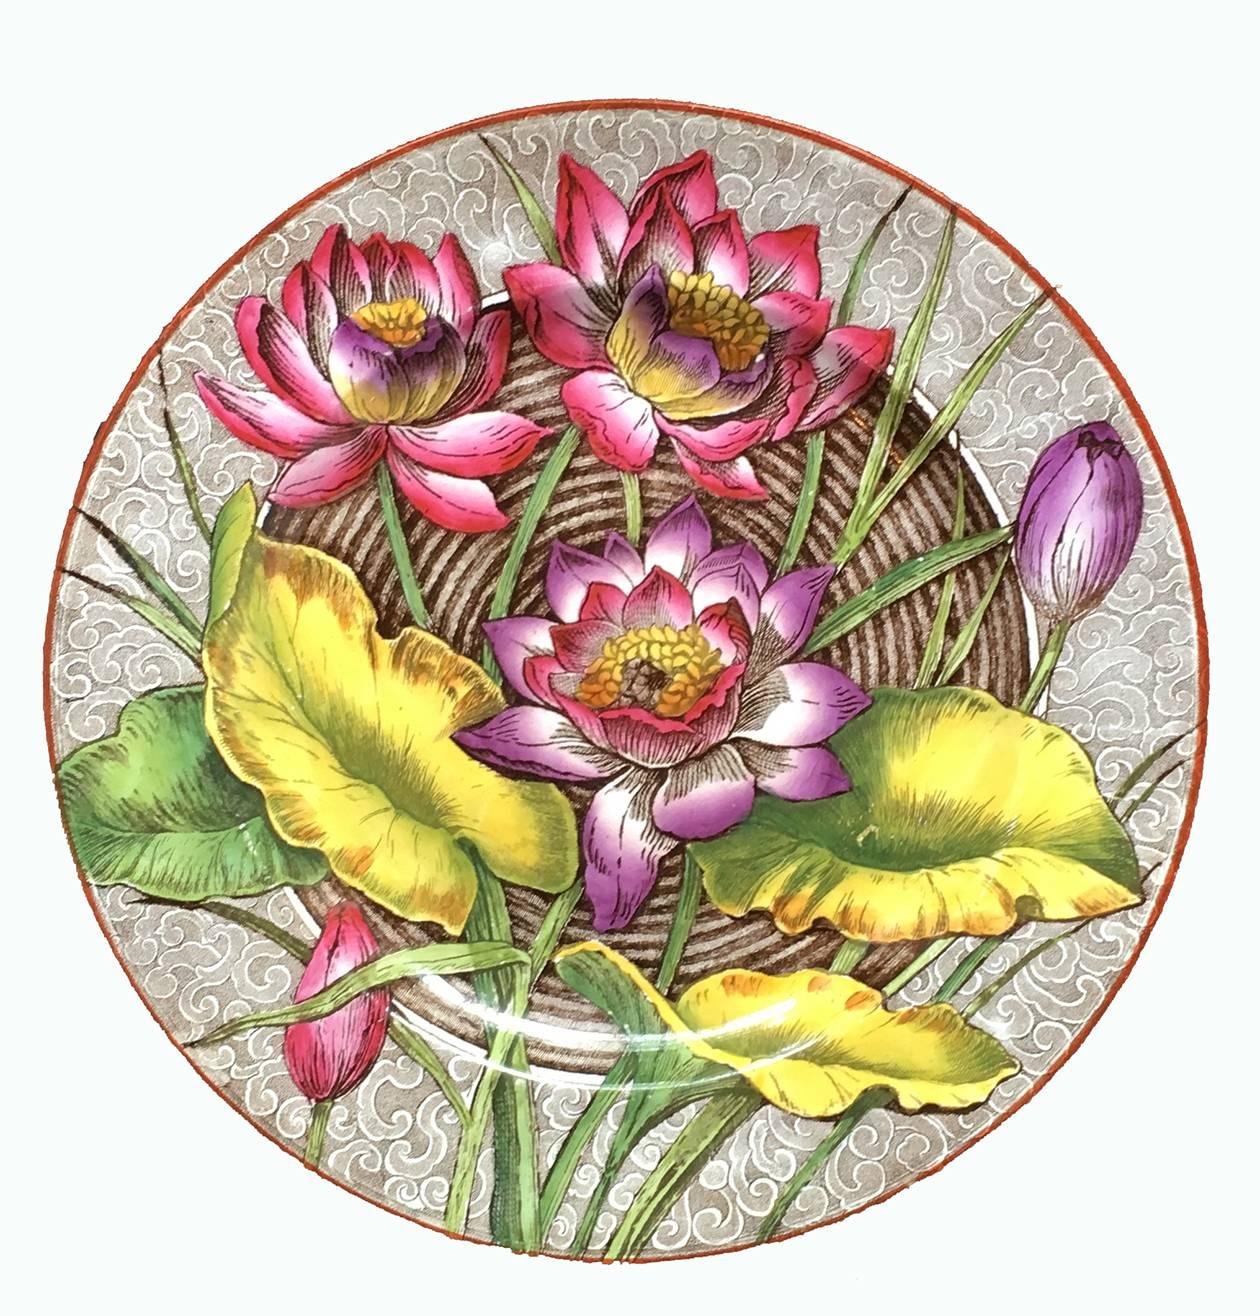 English Wedgwood Aesthetic Movement dinner plates in water lily pattern, available as a group of five plates in the same transfer-printed pattern, of a circular basket of concentric brown bands under a brocaded border, all featuring Water Lilies aka